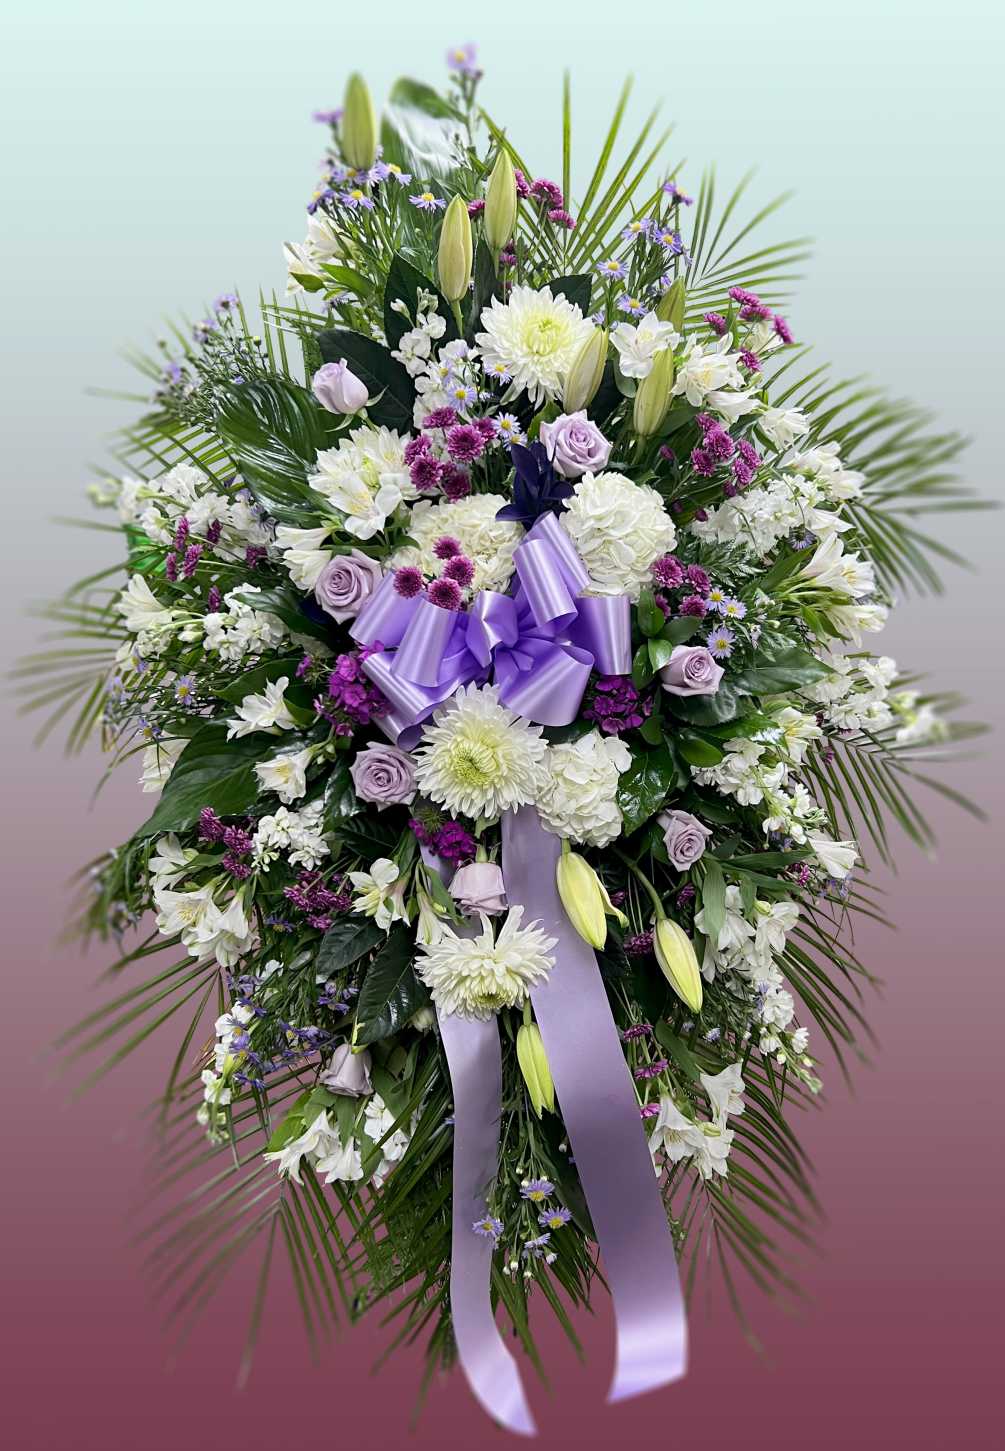 This easel spray is composed of lavender roses, mums, oriental lilies, dianthus